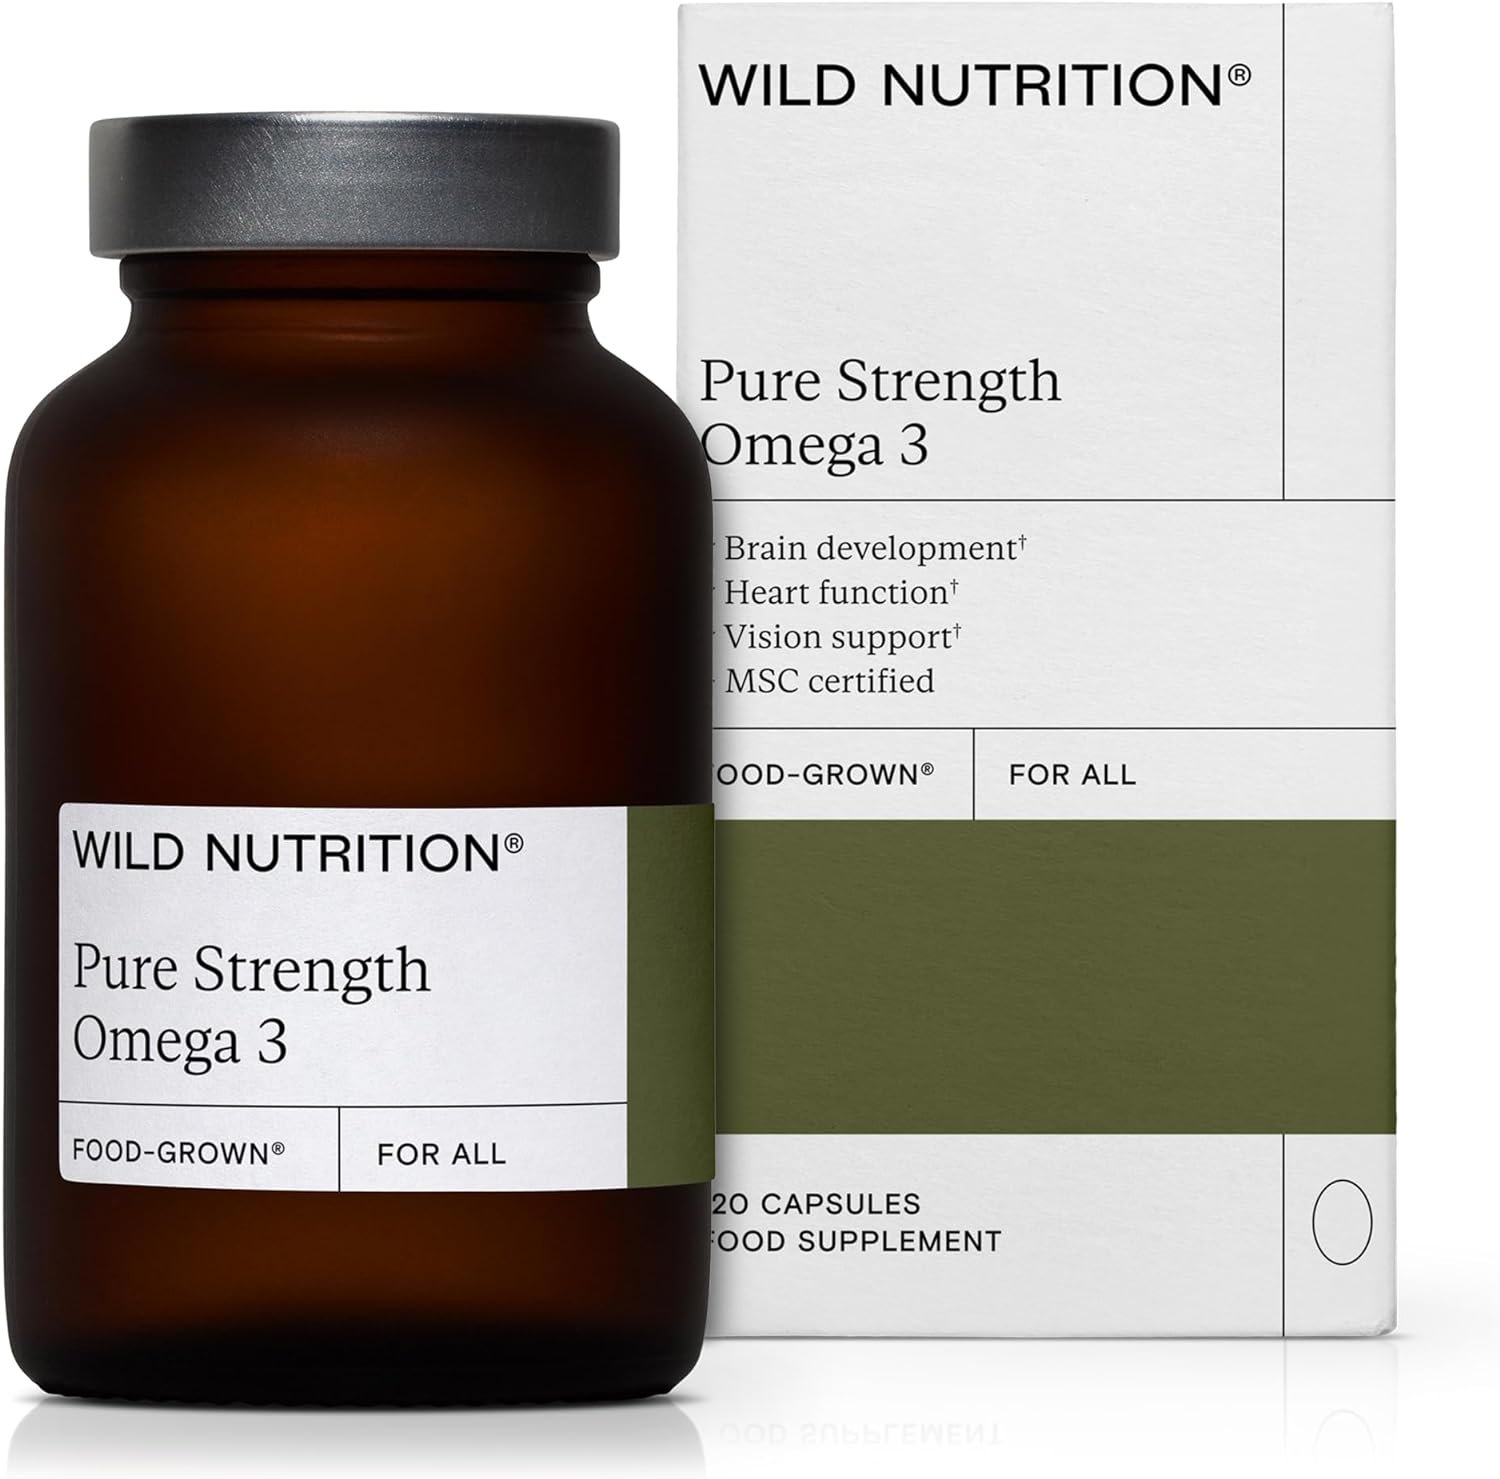 Wild Nutrition Pure Omega 3 Supplement